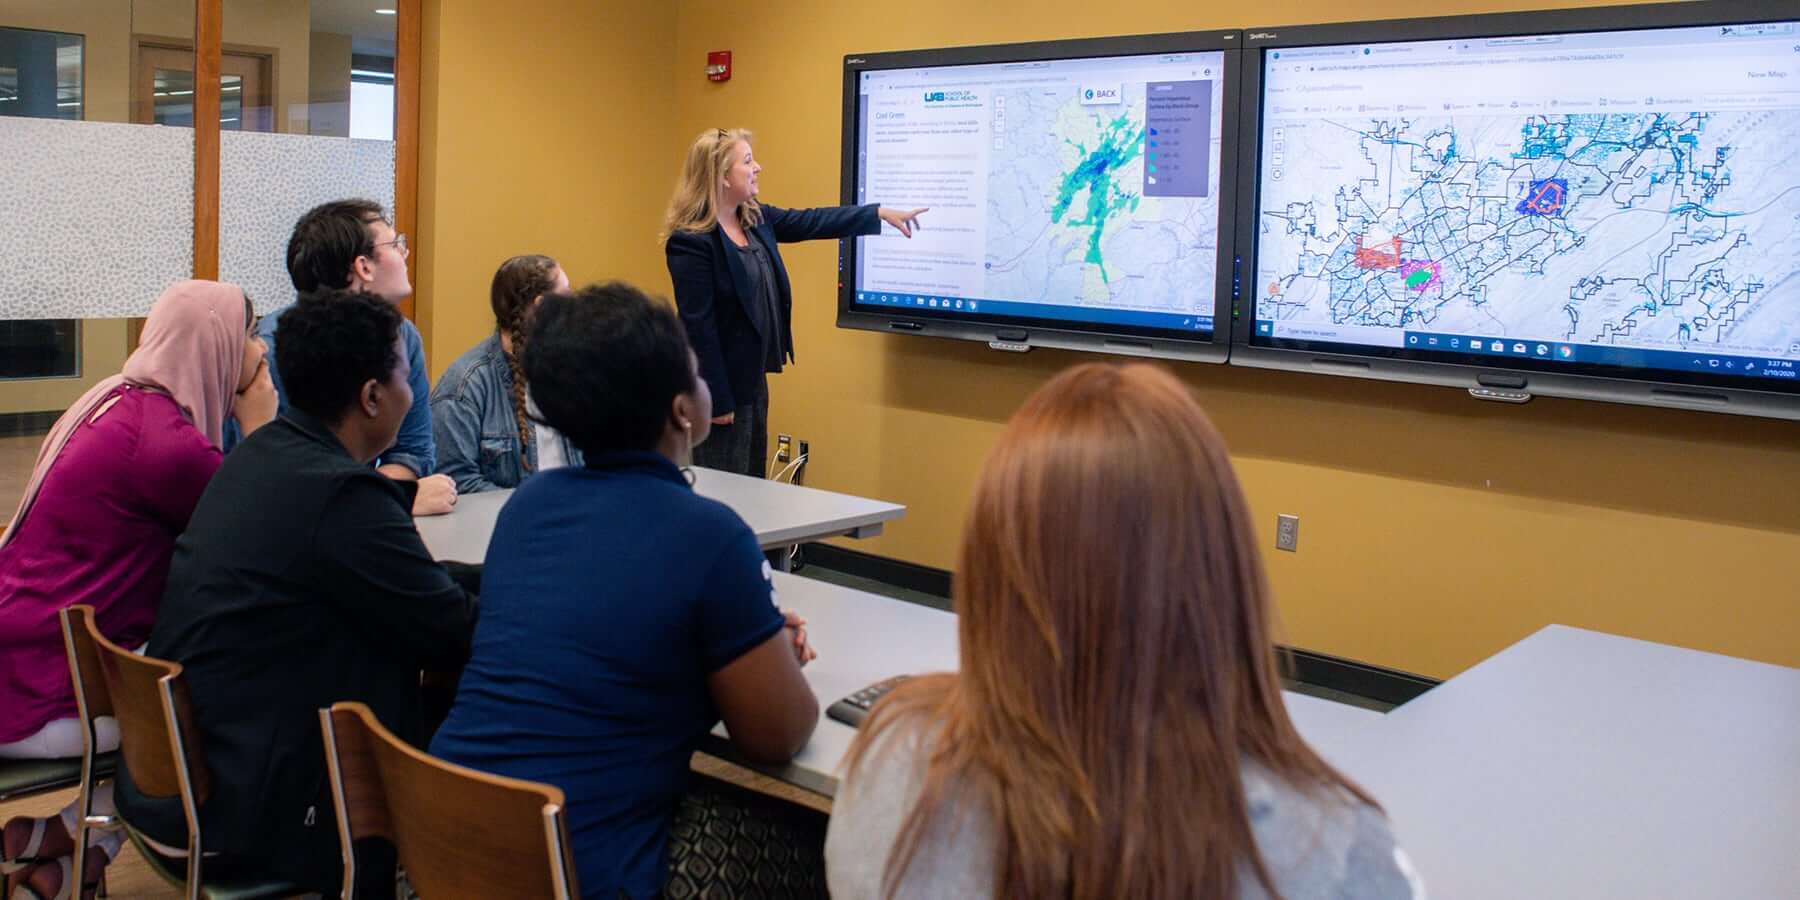 Female professor teaching students using tv displays to present class material.